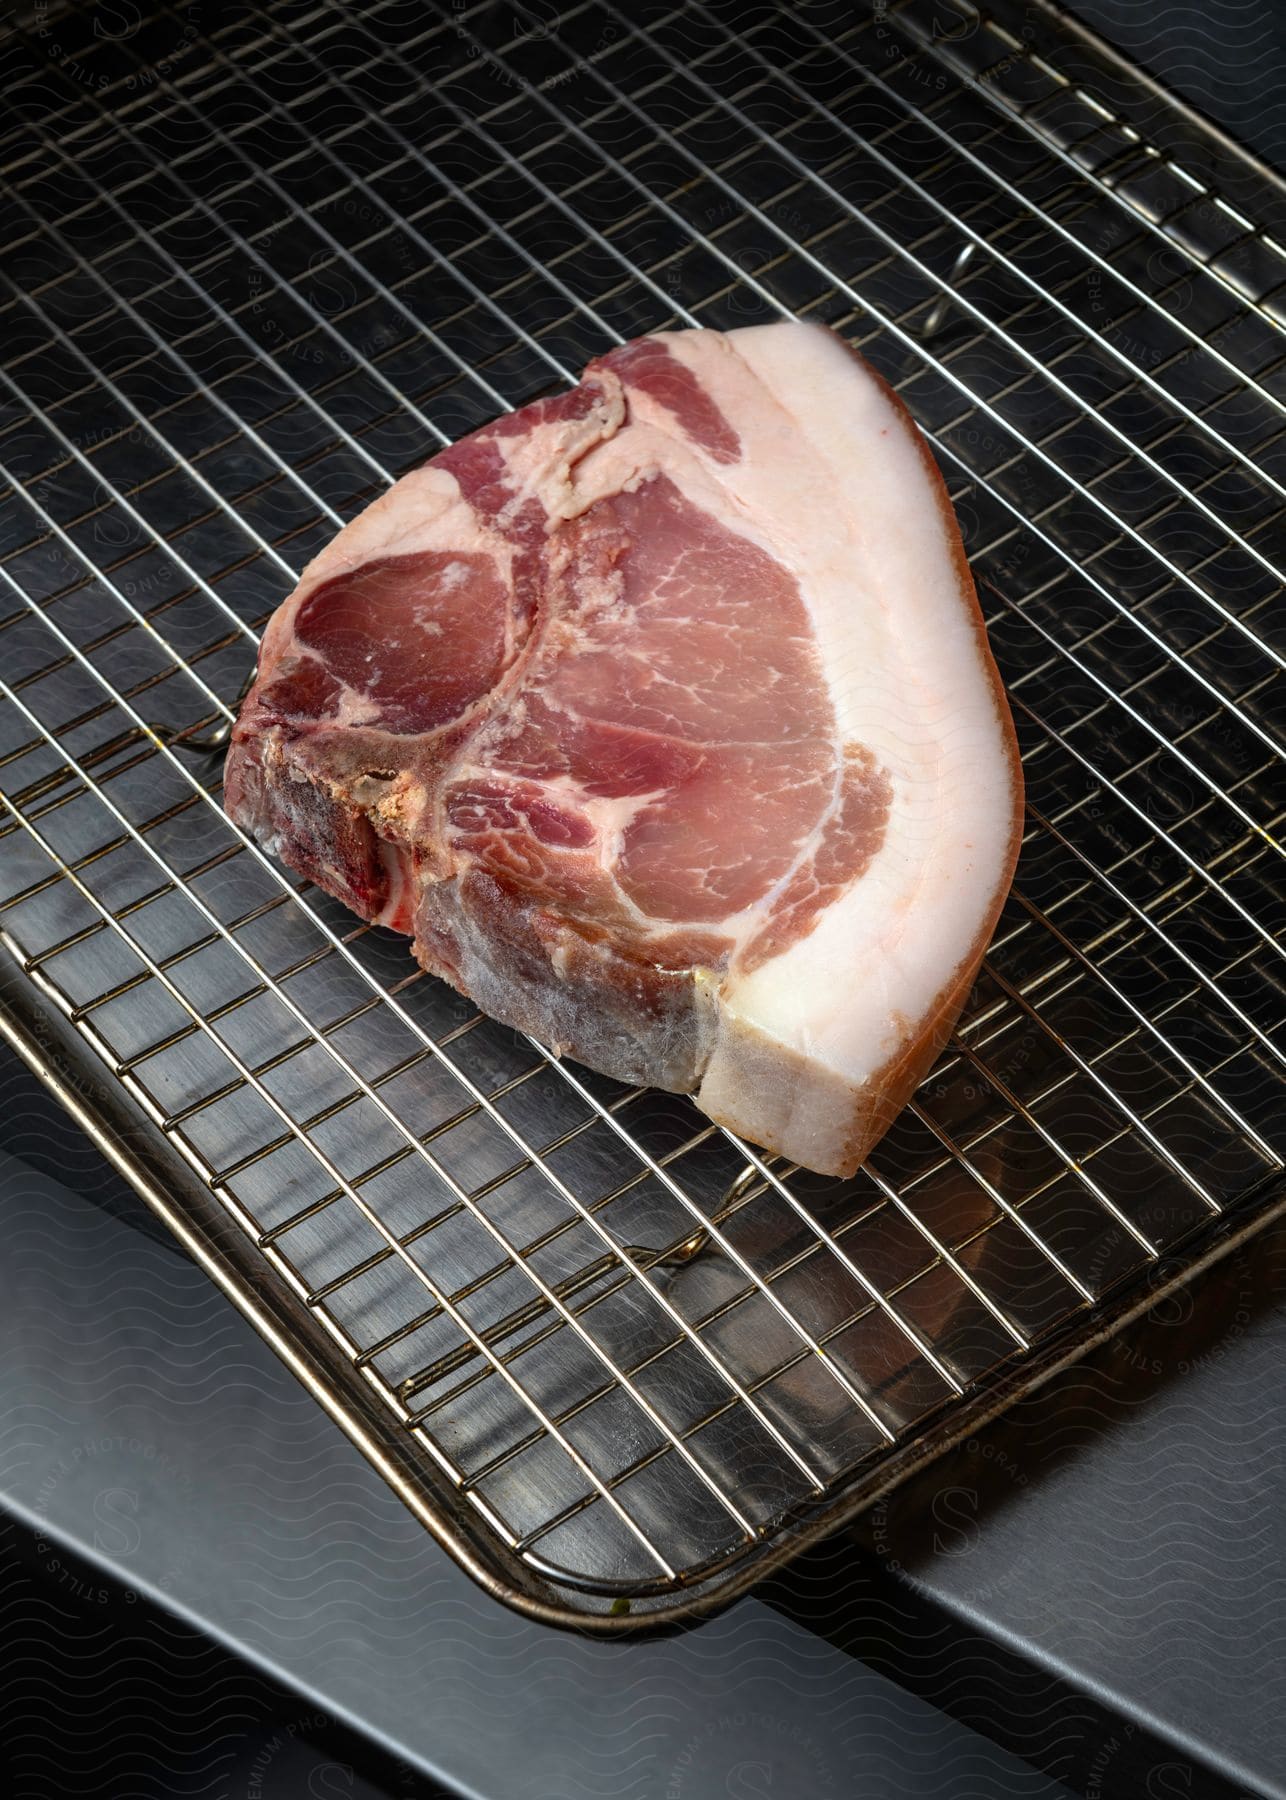 A thick, raw pork chop sits on top of a metal roasting pan.